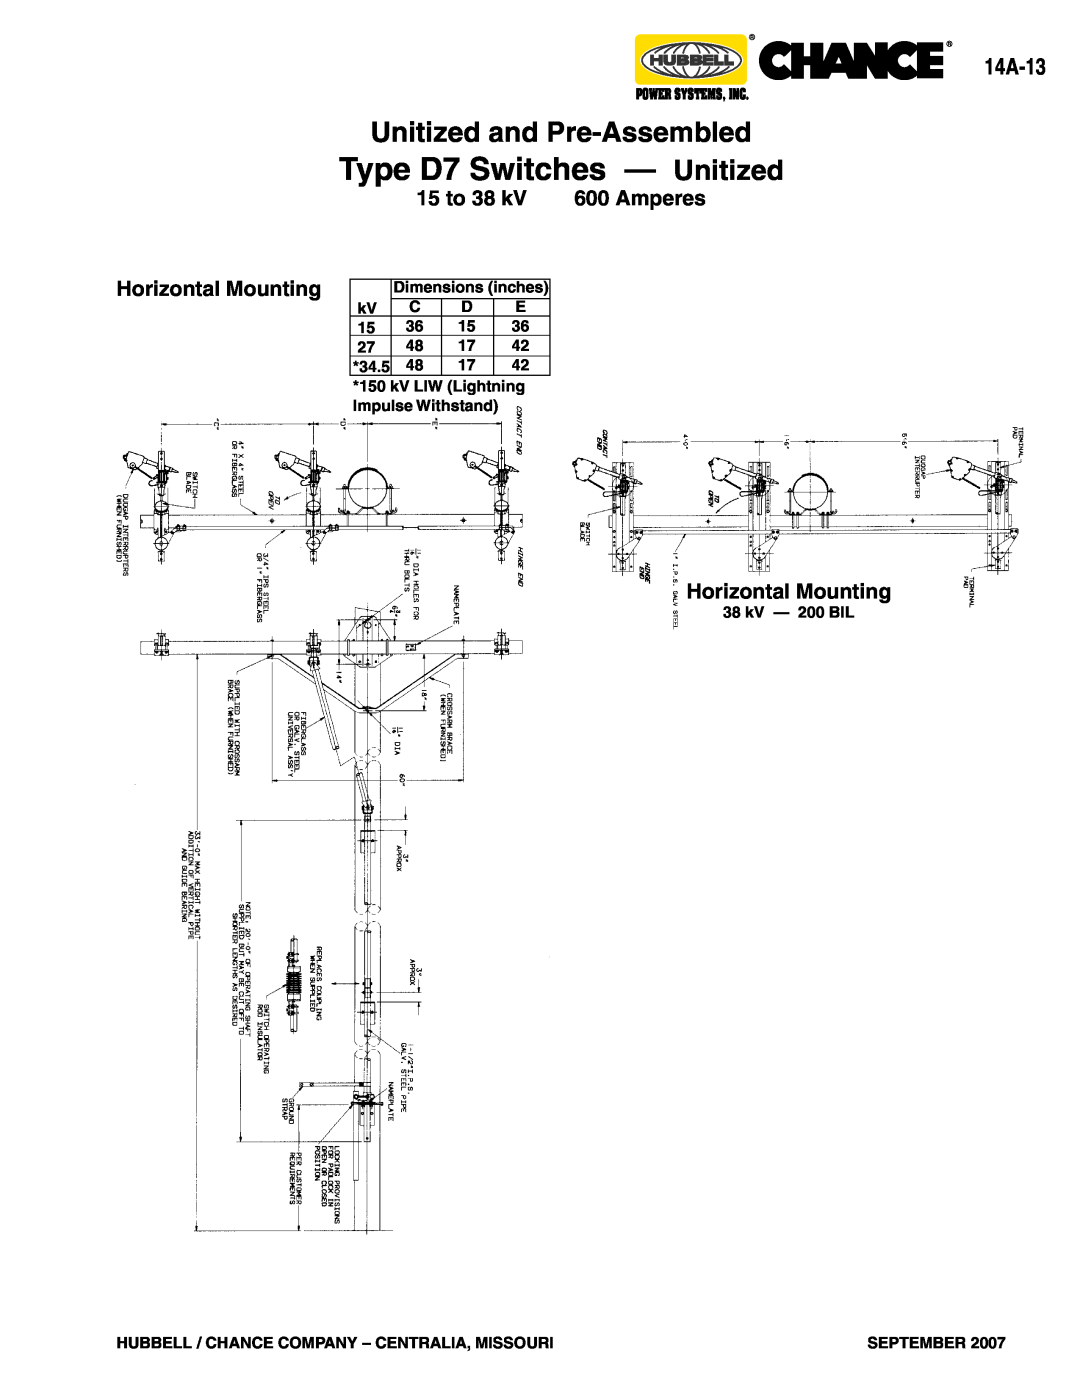 Hubbell Type AR 14A-13, 15 to 38 kV 600 Amperes, Horizontal Mounting, Type D7 Switches - Unitized, Dimensions inches 